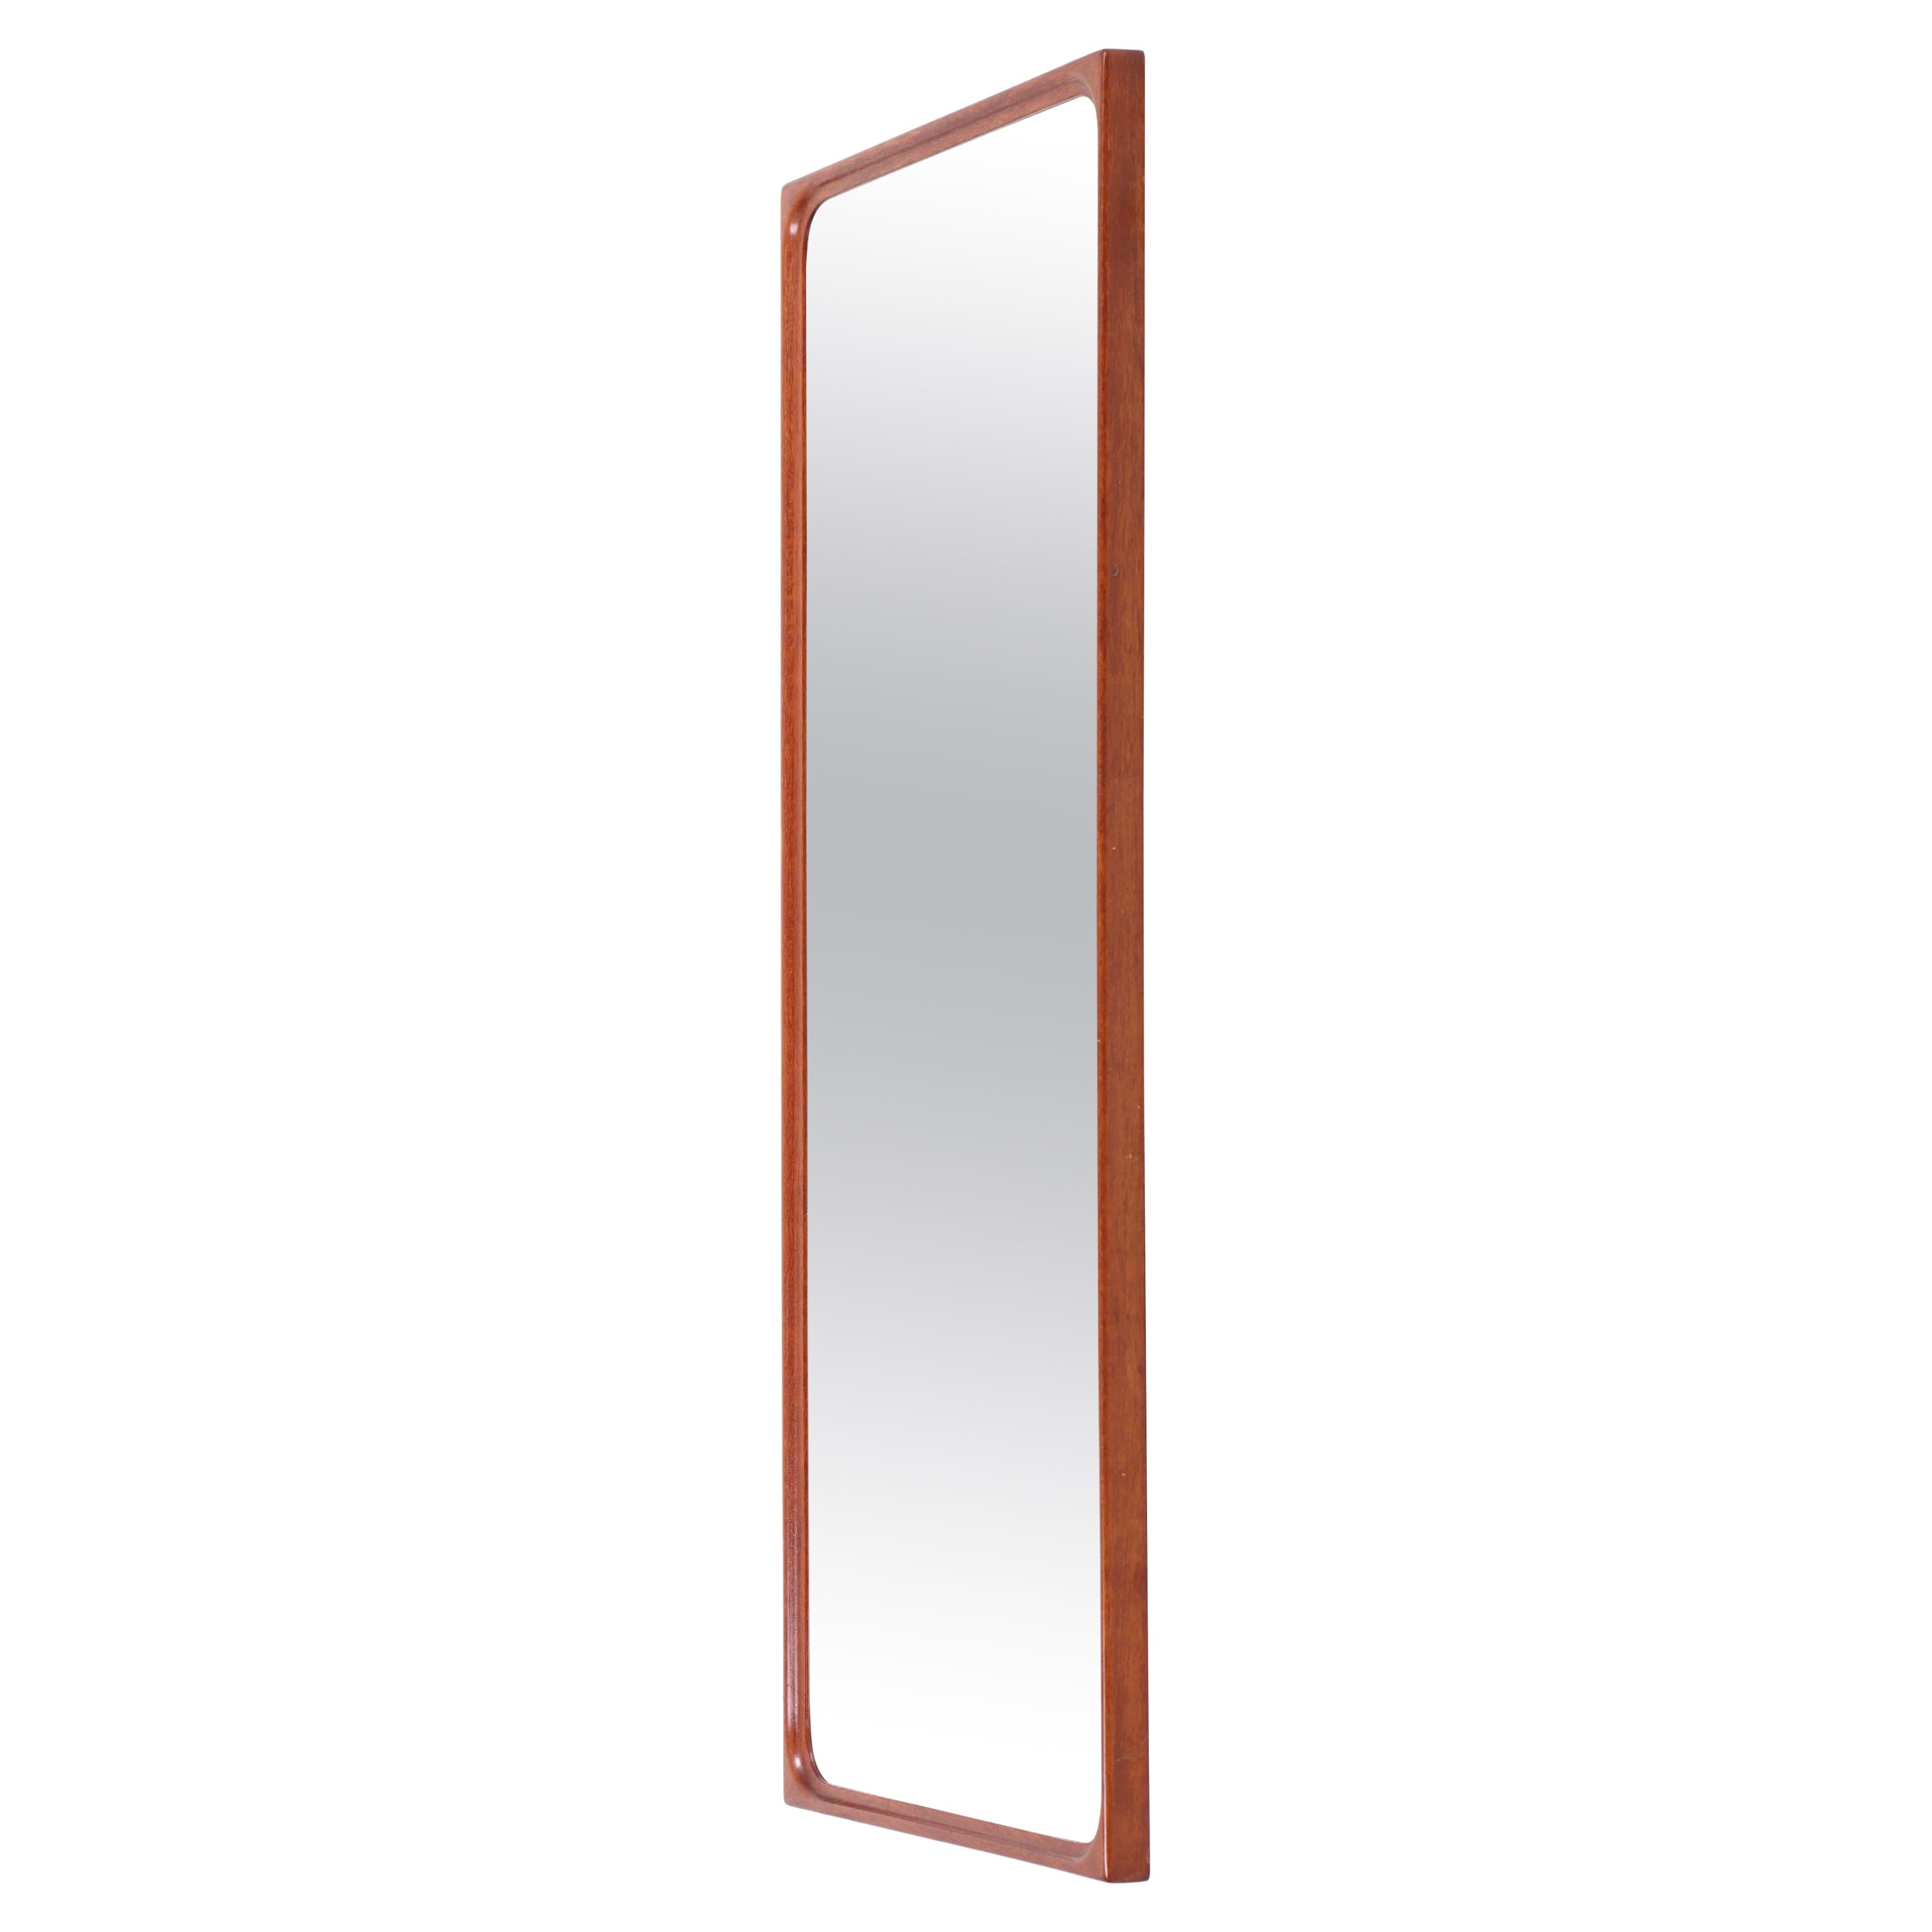 Midcentury Wall Mirror by K. Thomsen, Danish Modern, 1960s For Sale